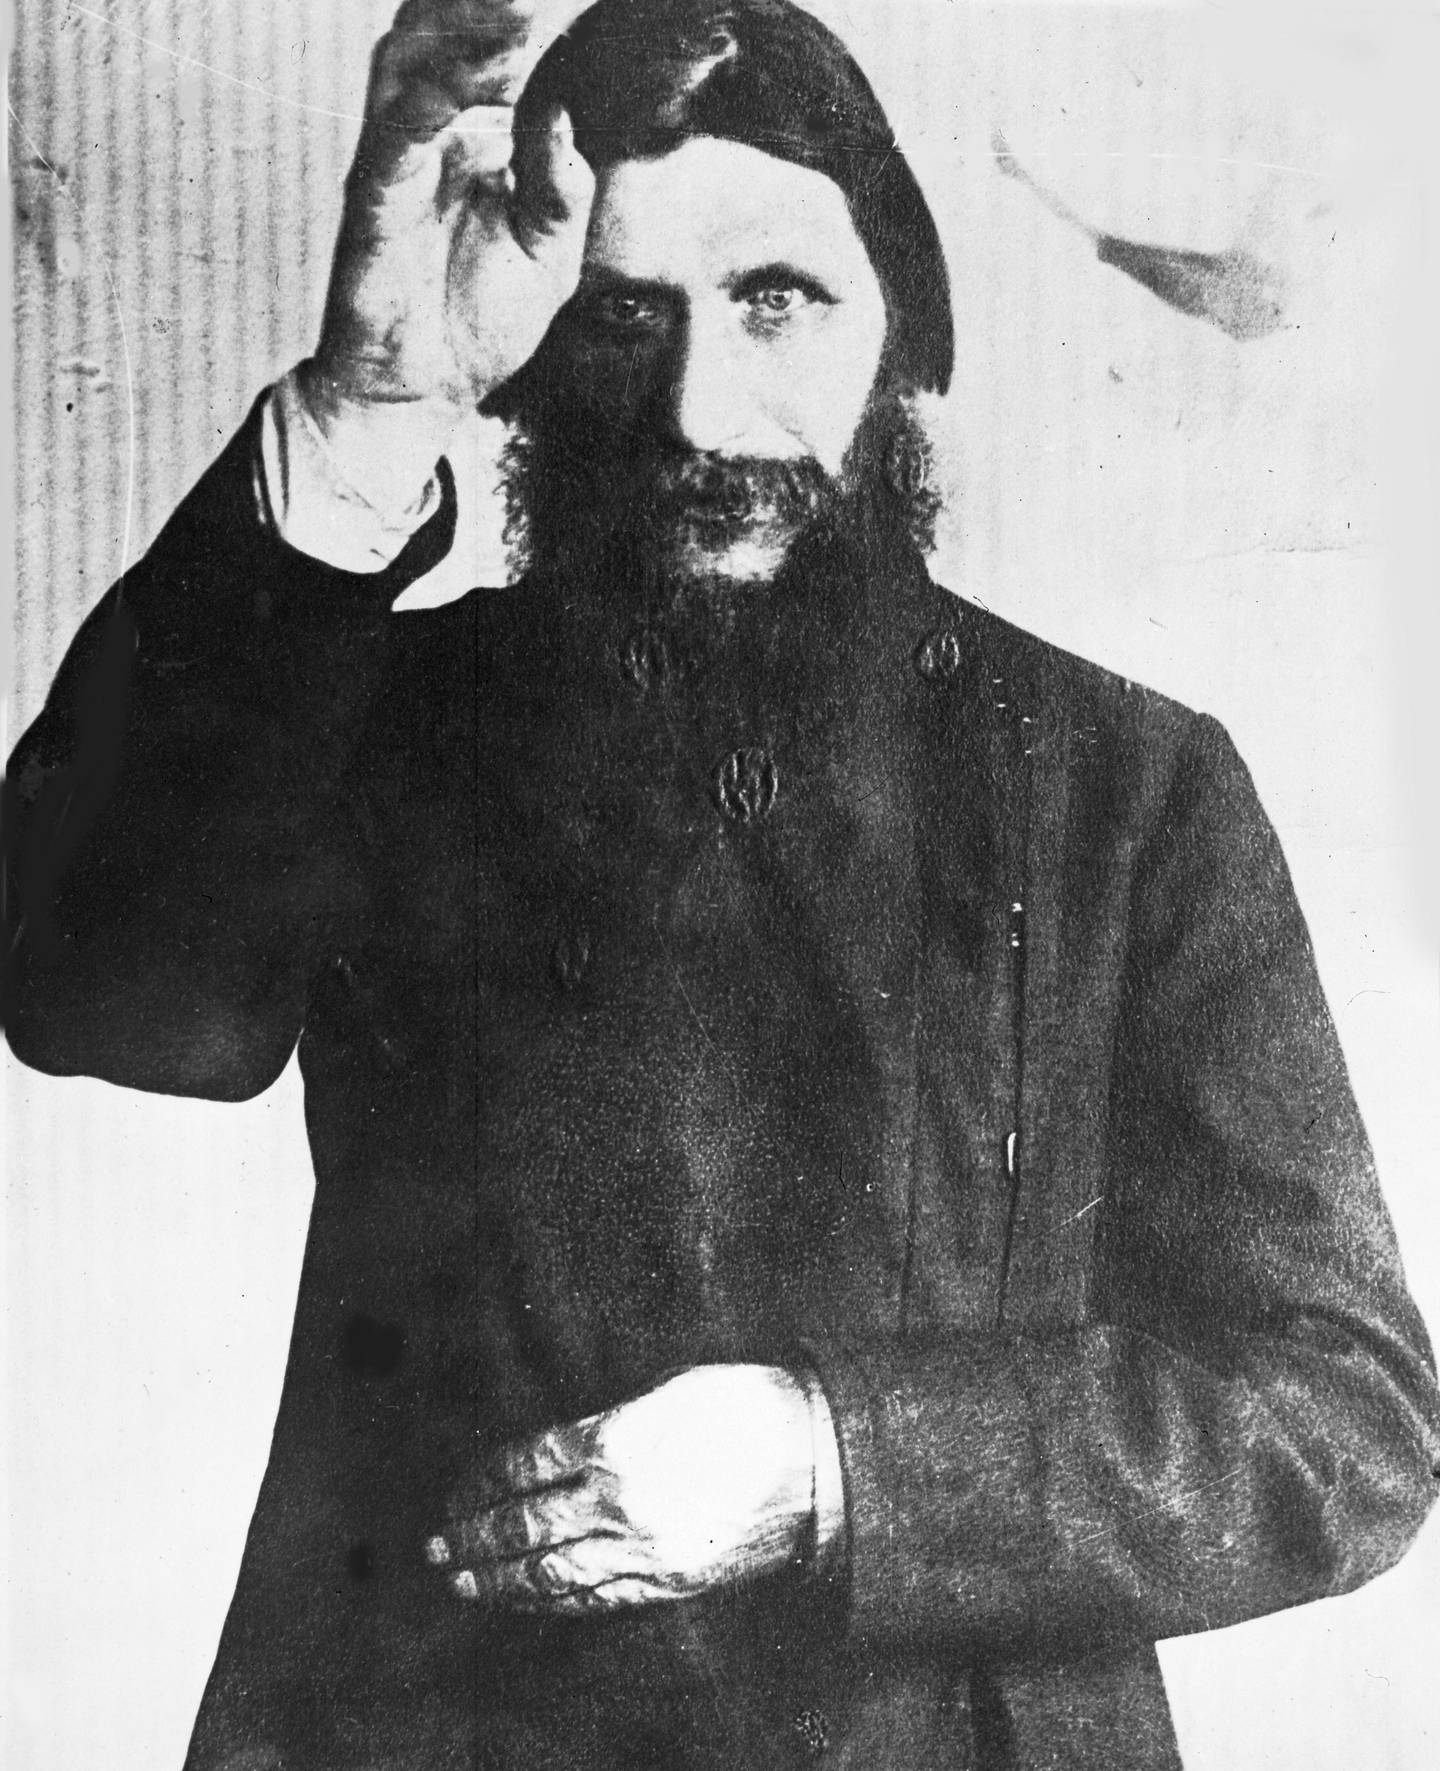 Undated photo of Rasputin, the self-styled monk who was killed 1916 by Prince Youssoupoff, because of his evil influence of the Russian Royal Family. (AP Photo)